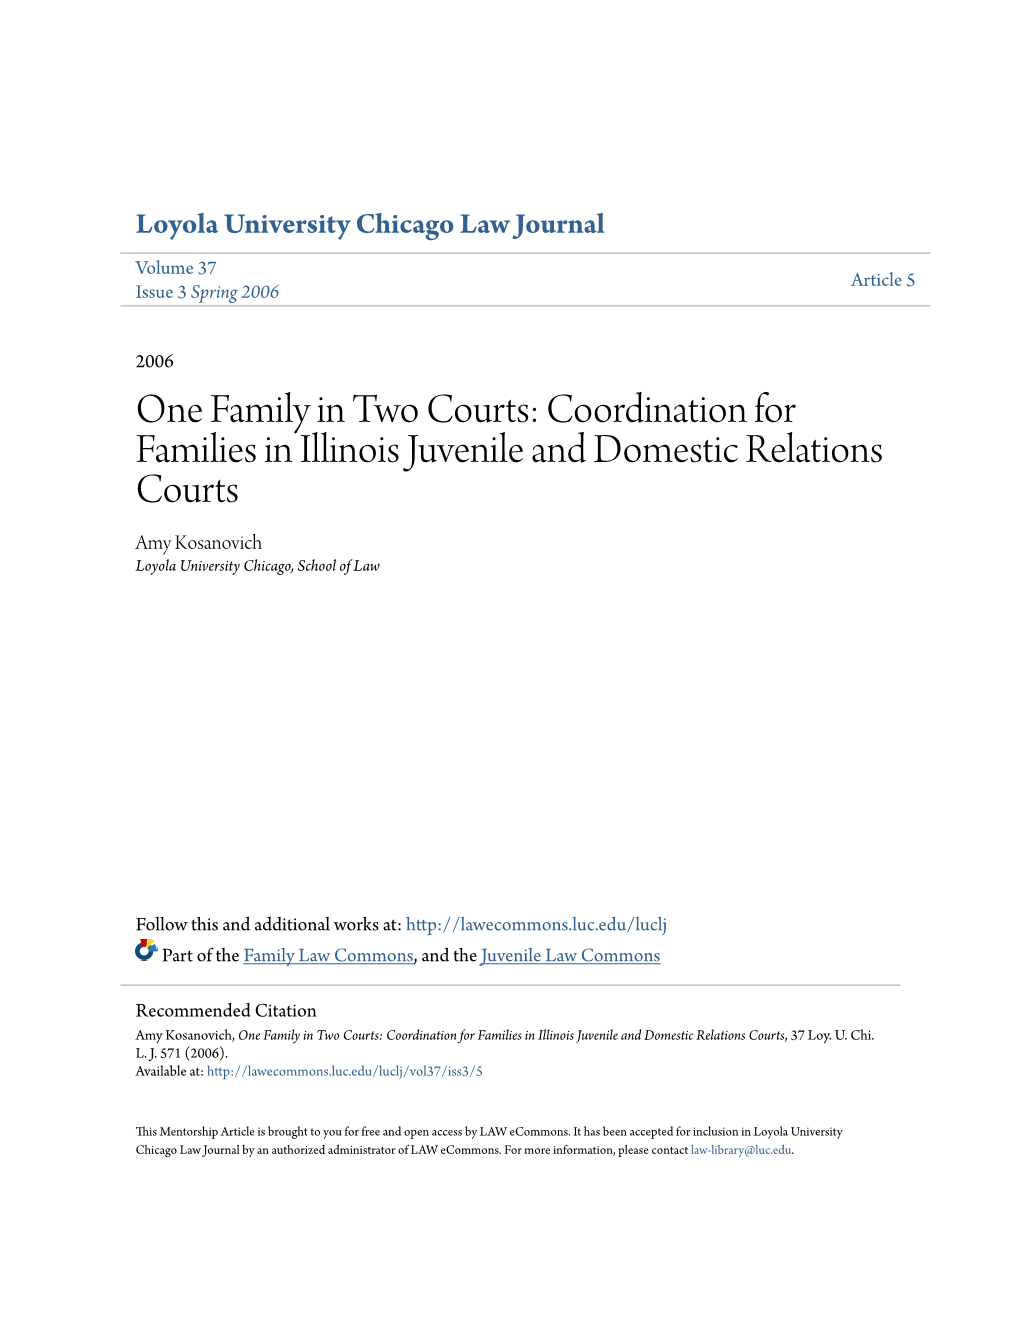 Coordination for Families in Illinois Juvenile and Domestic Relations Courts Amy Kosanovich Loyola University Chicago, School of Law